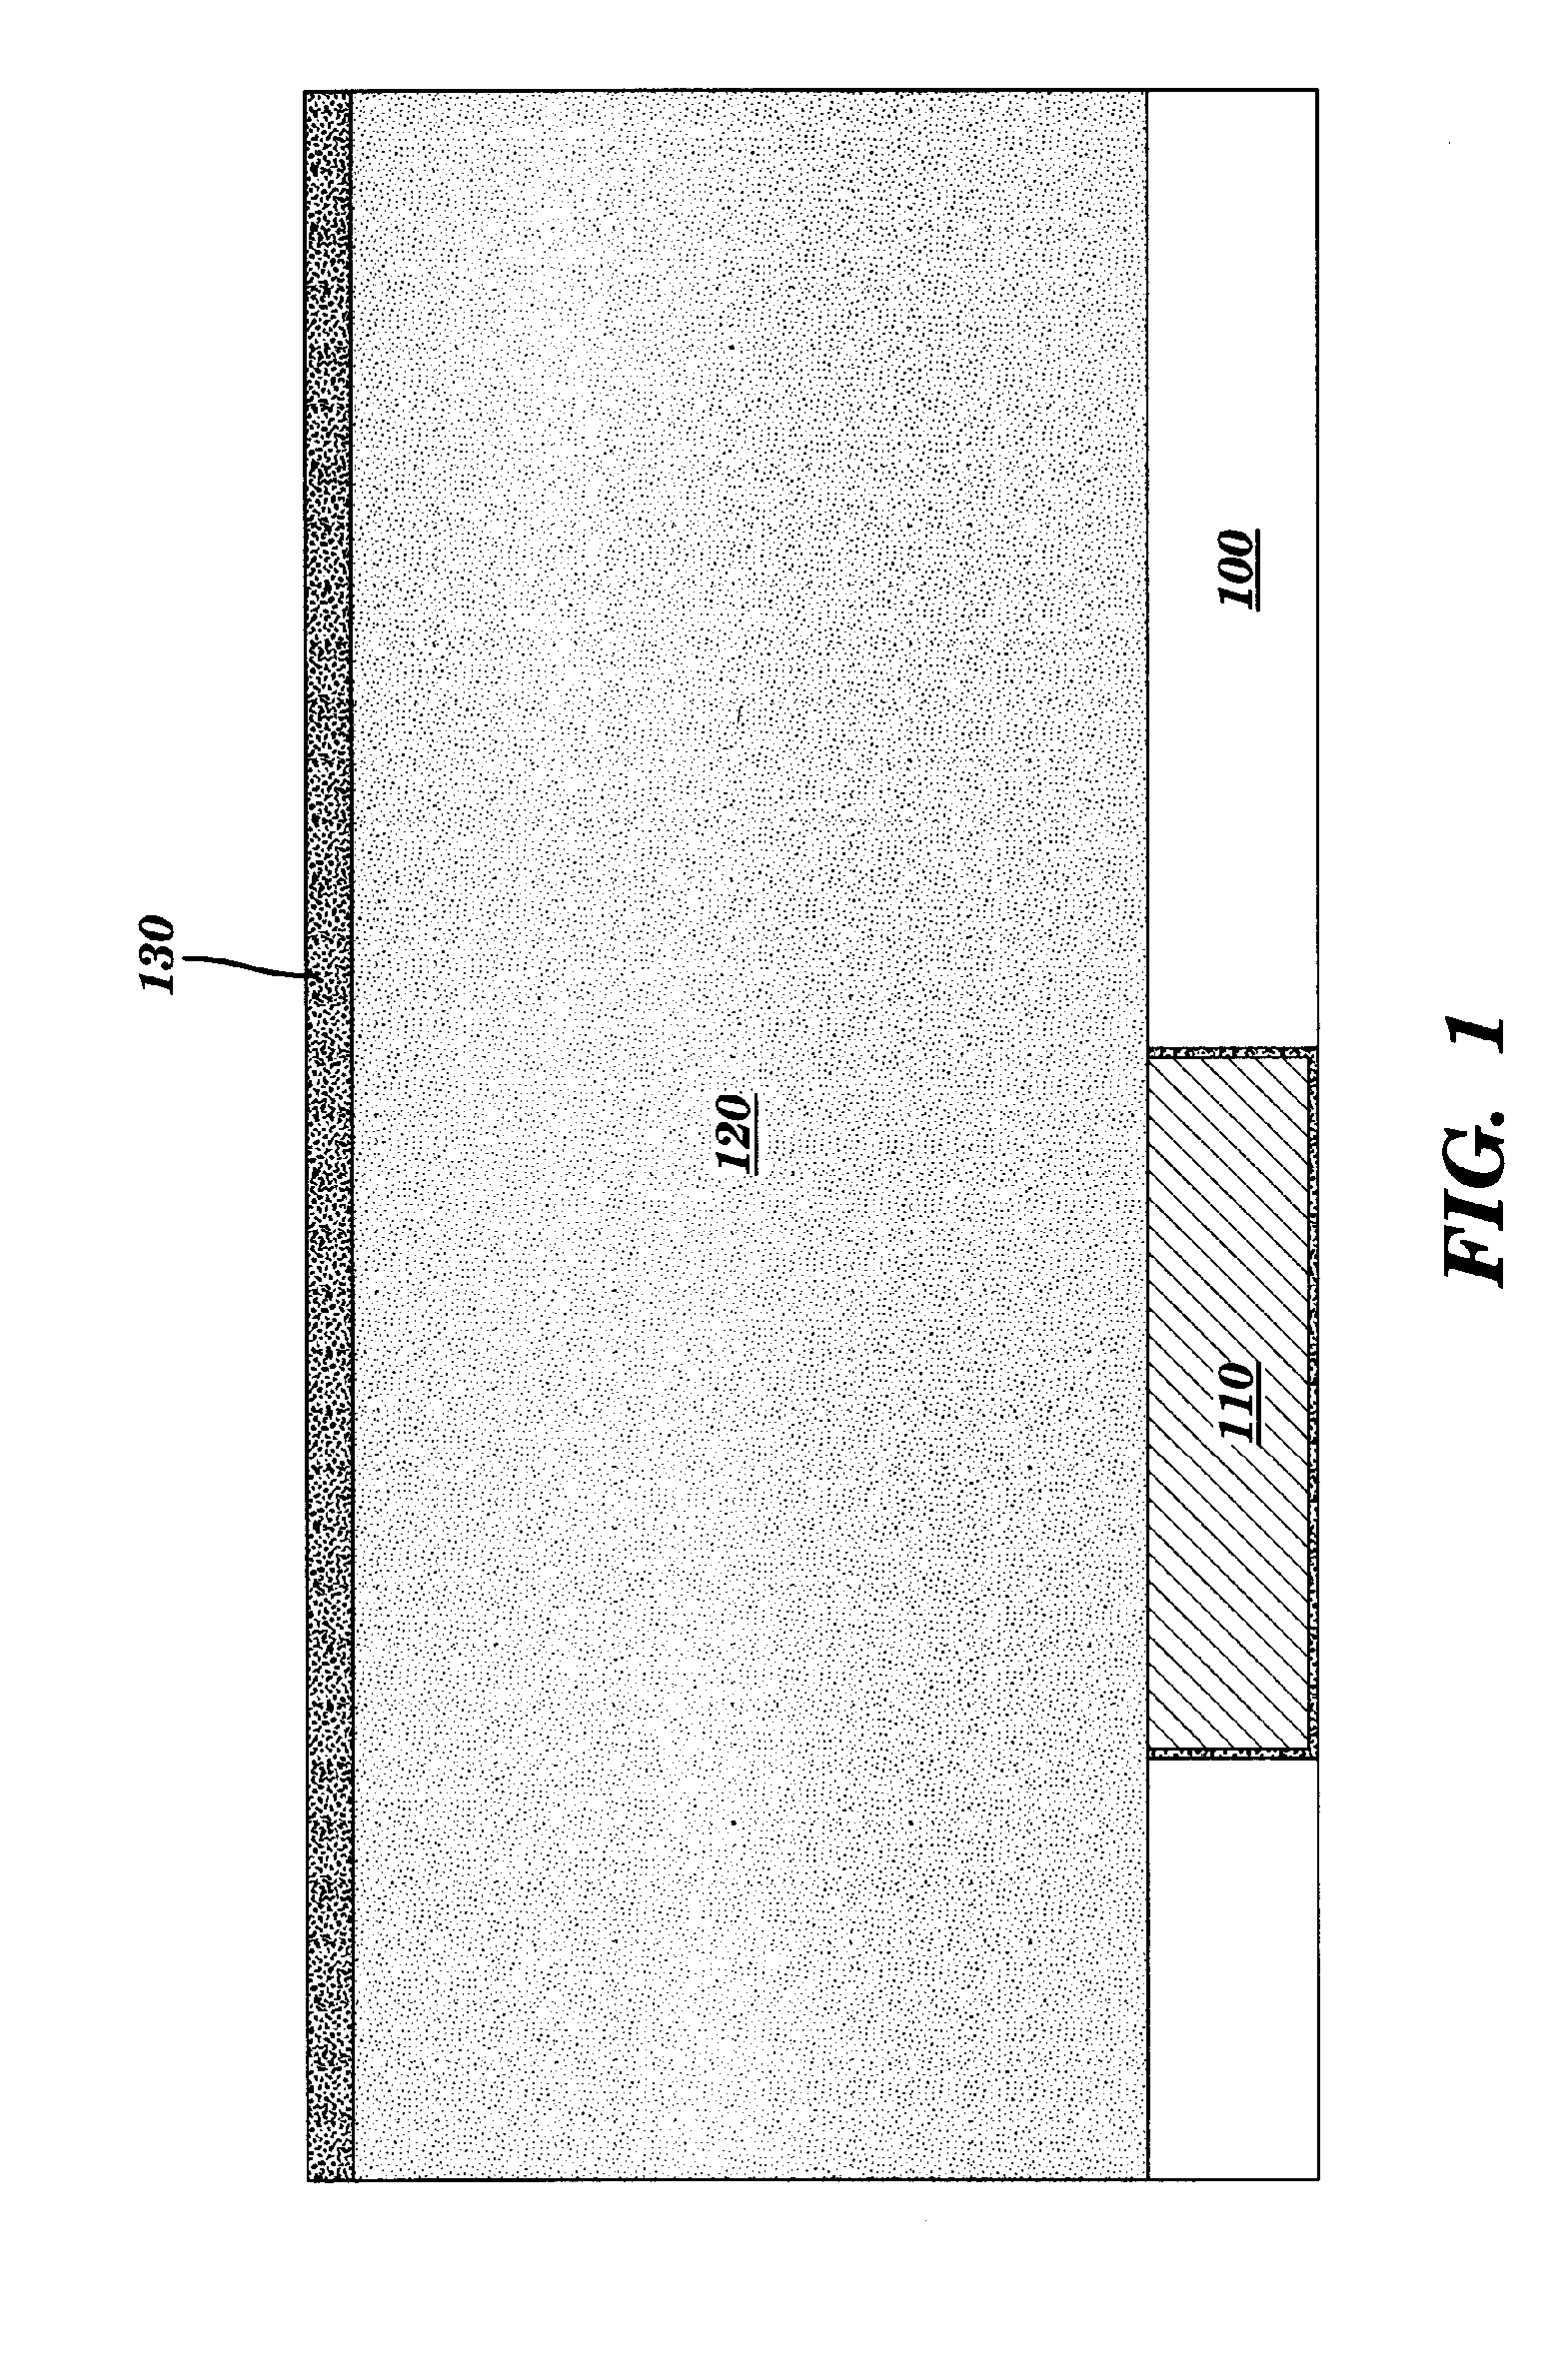 Gas dielectric structure forming methods